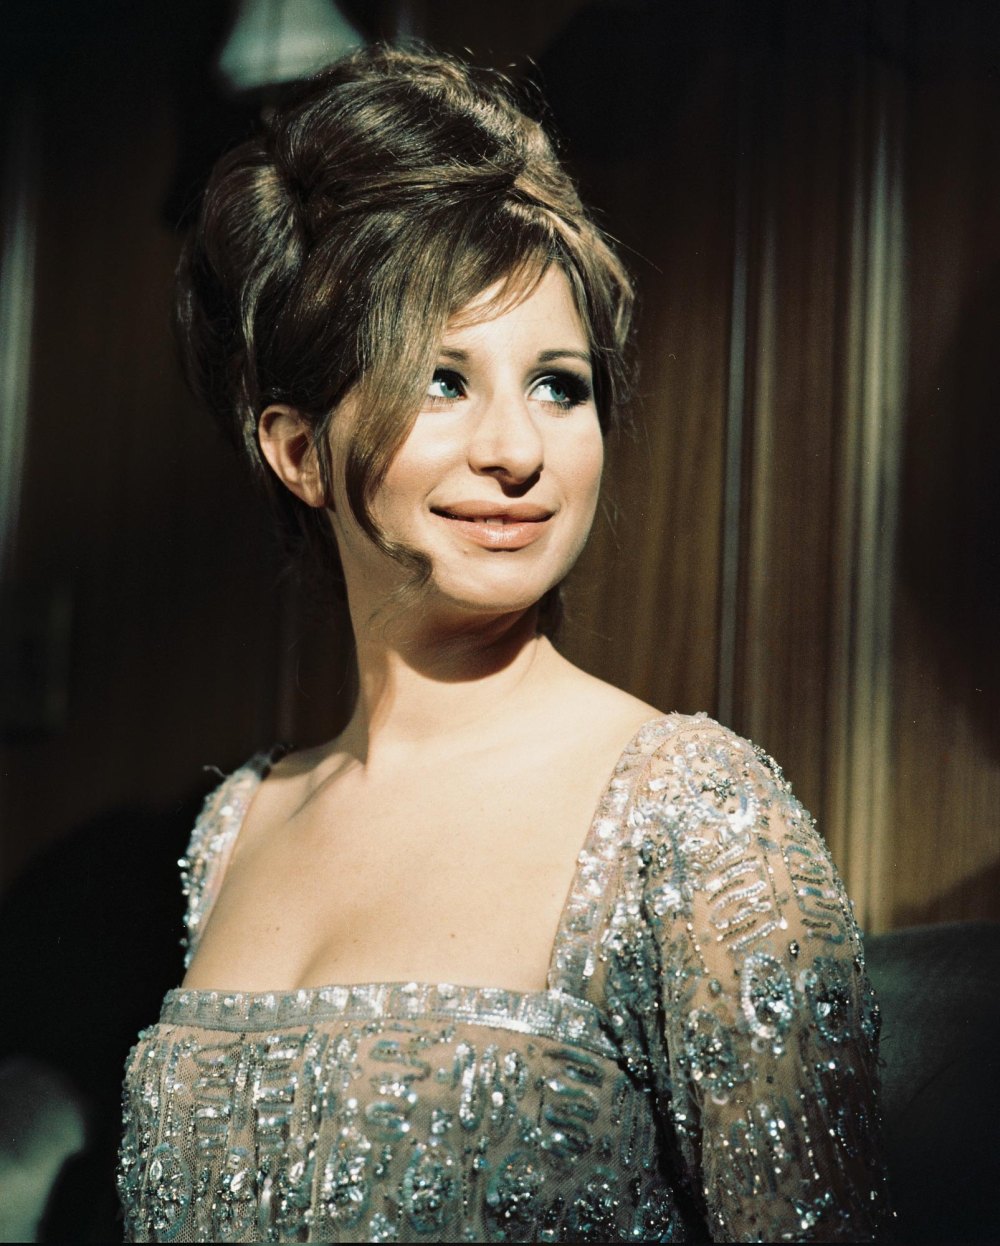 Barbra Streisand Details Ups and Downs With Mom Ex Elliot Gould and More Book Revelations 238